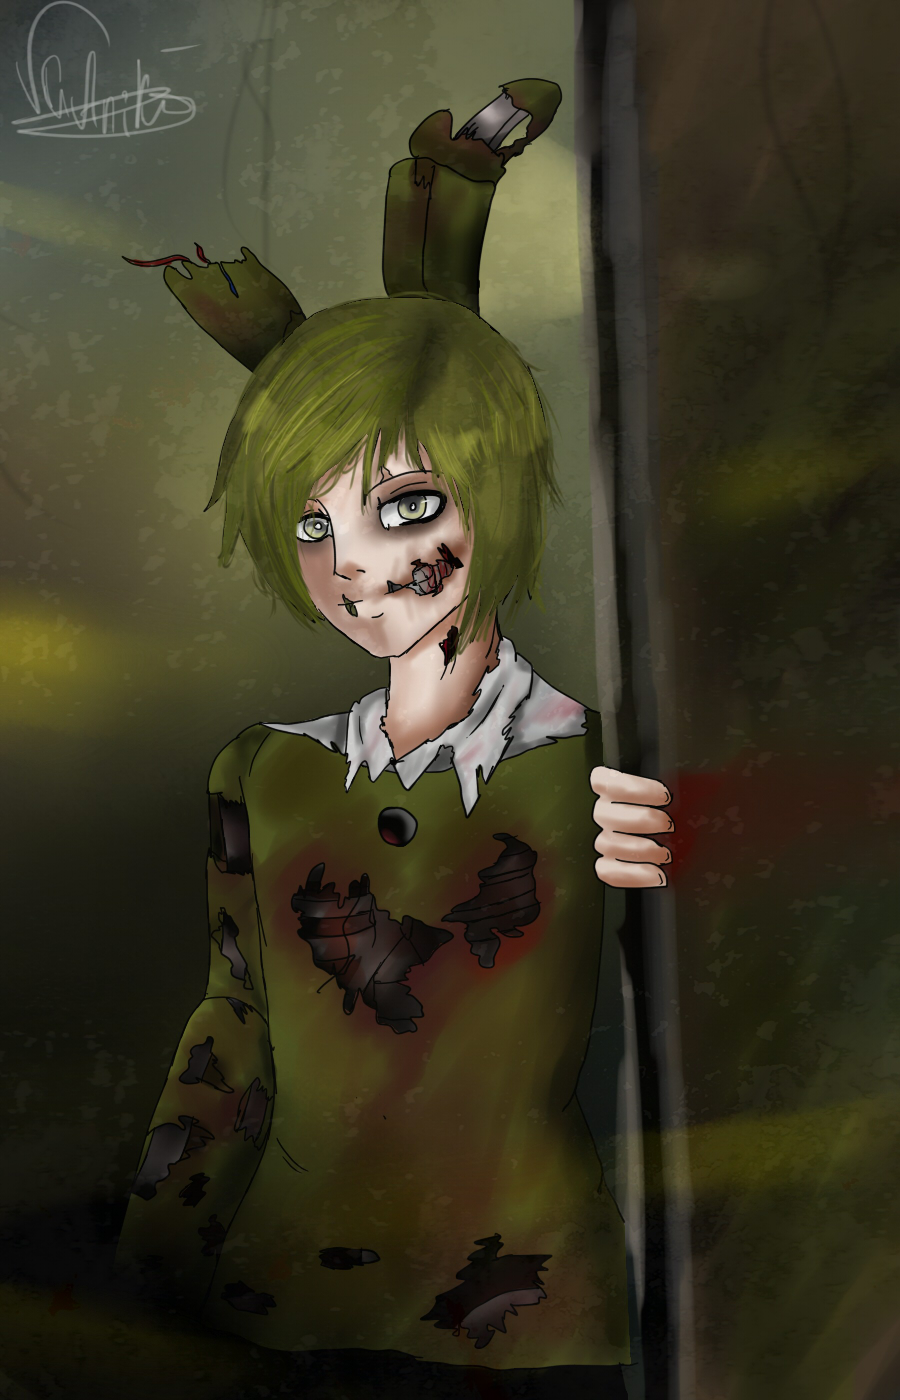 Five Nights at Freddy's 3 - Springtrap by Christian2099 on DeviantArt